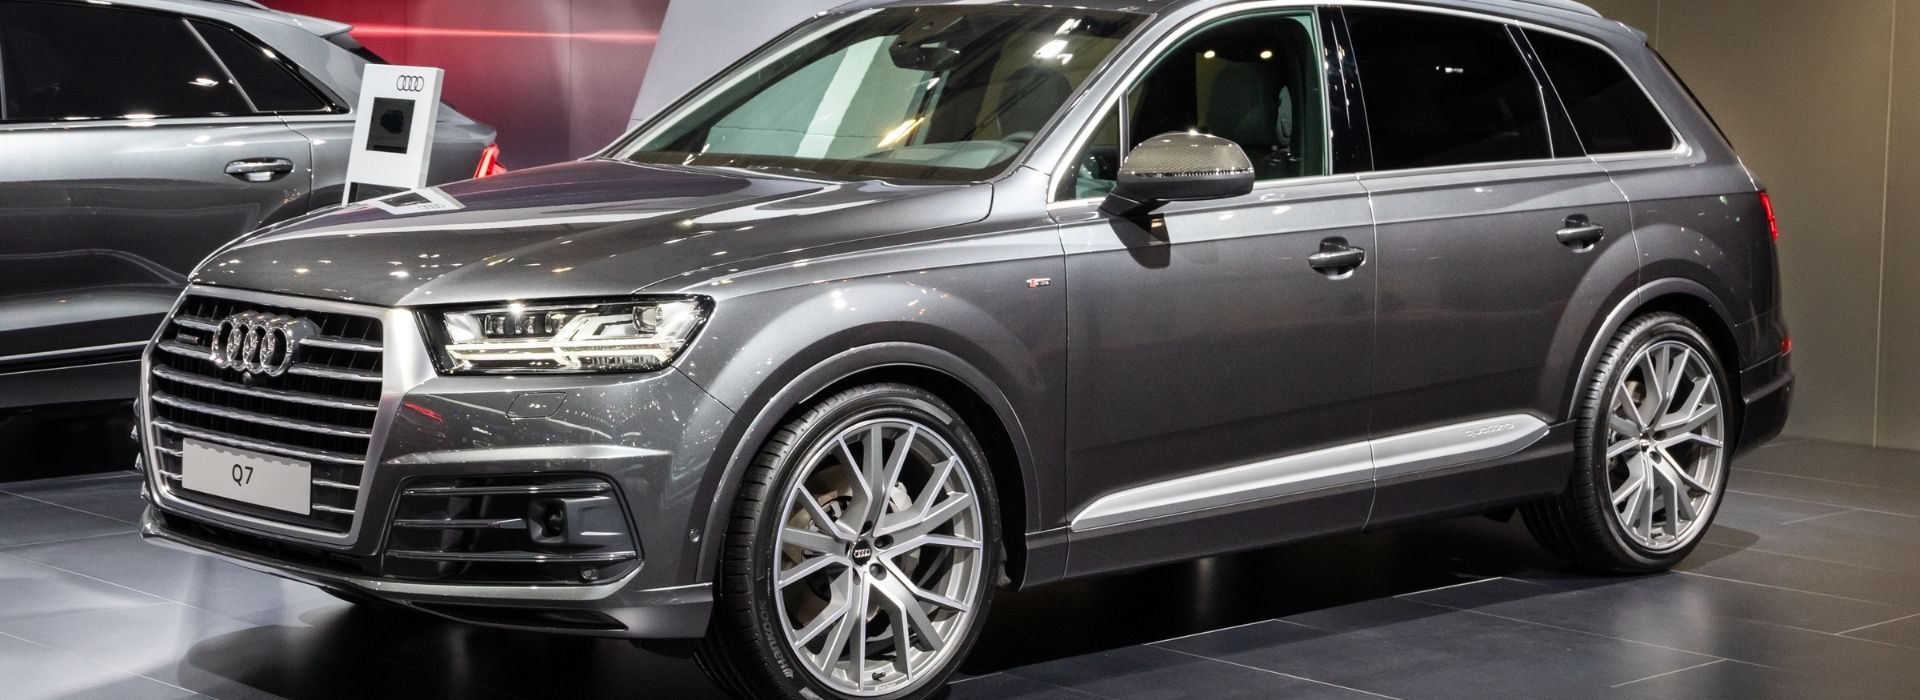 Five things you need to know about the Audi Q7